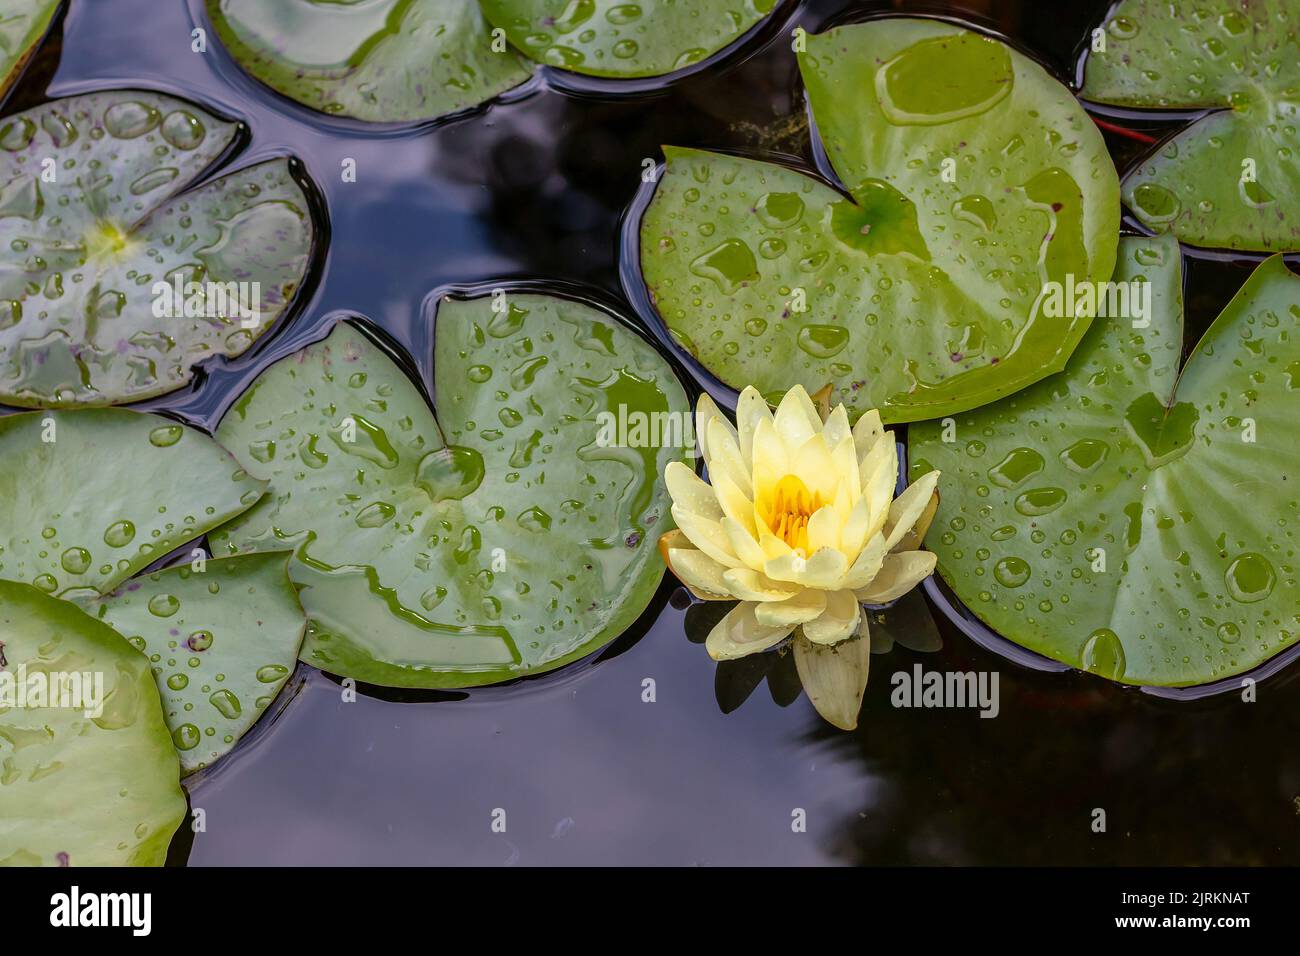 Nymphaea, white water lily flower on water surface, green leaves around, top view Stock Photo